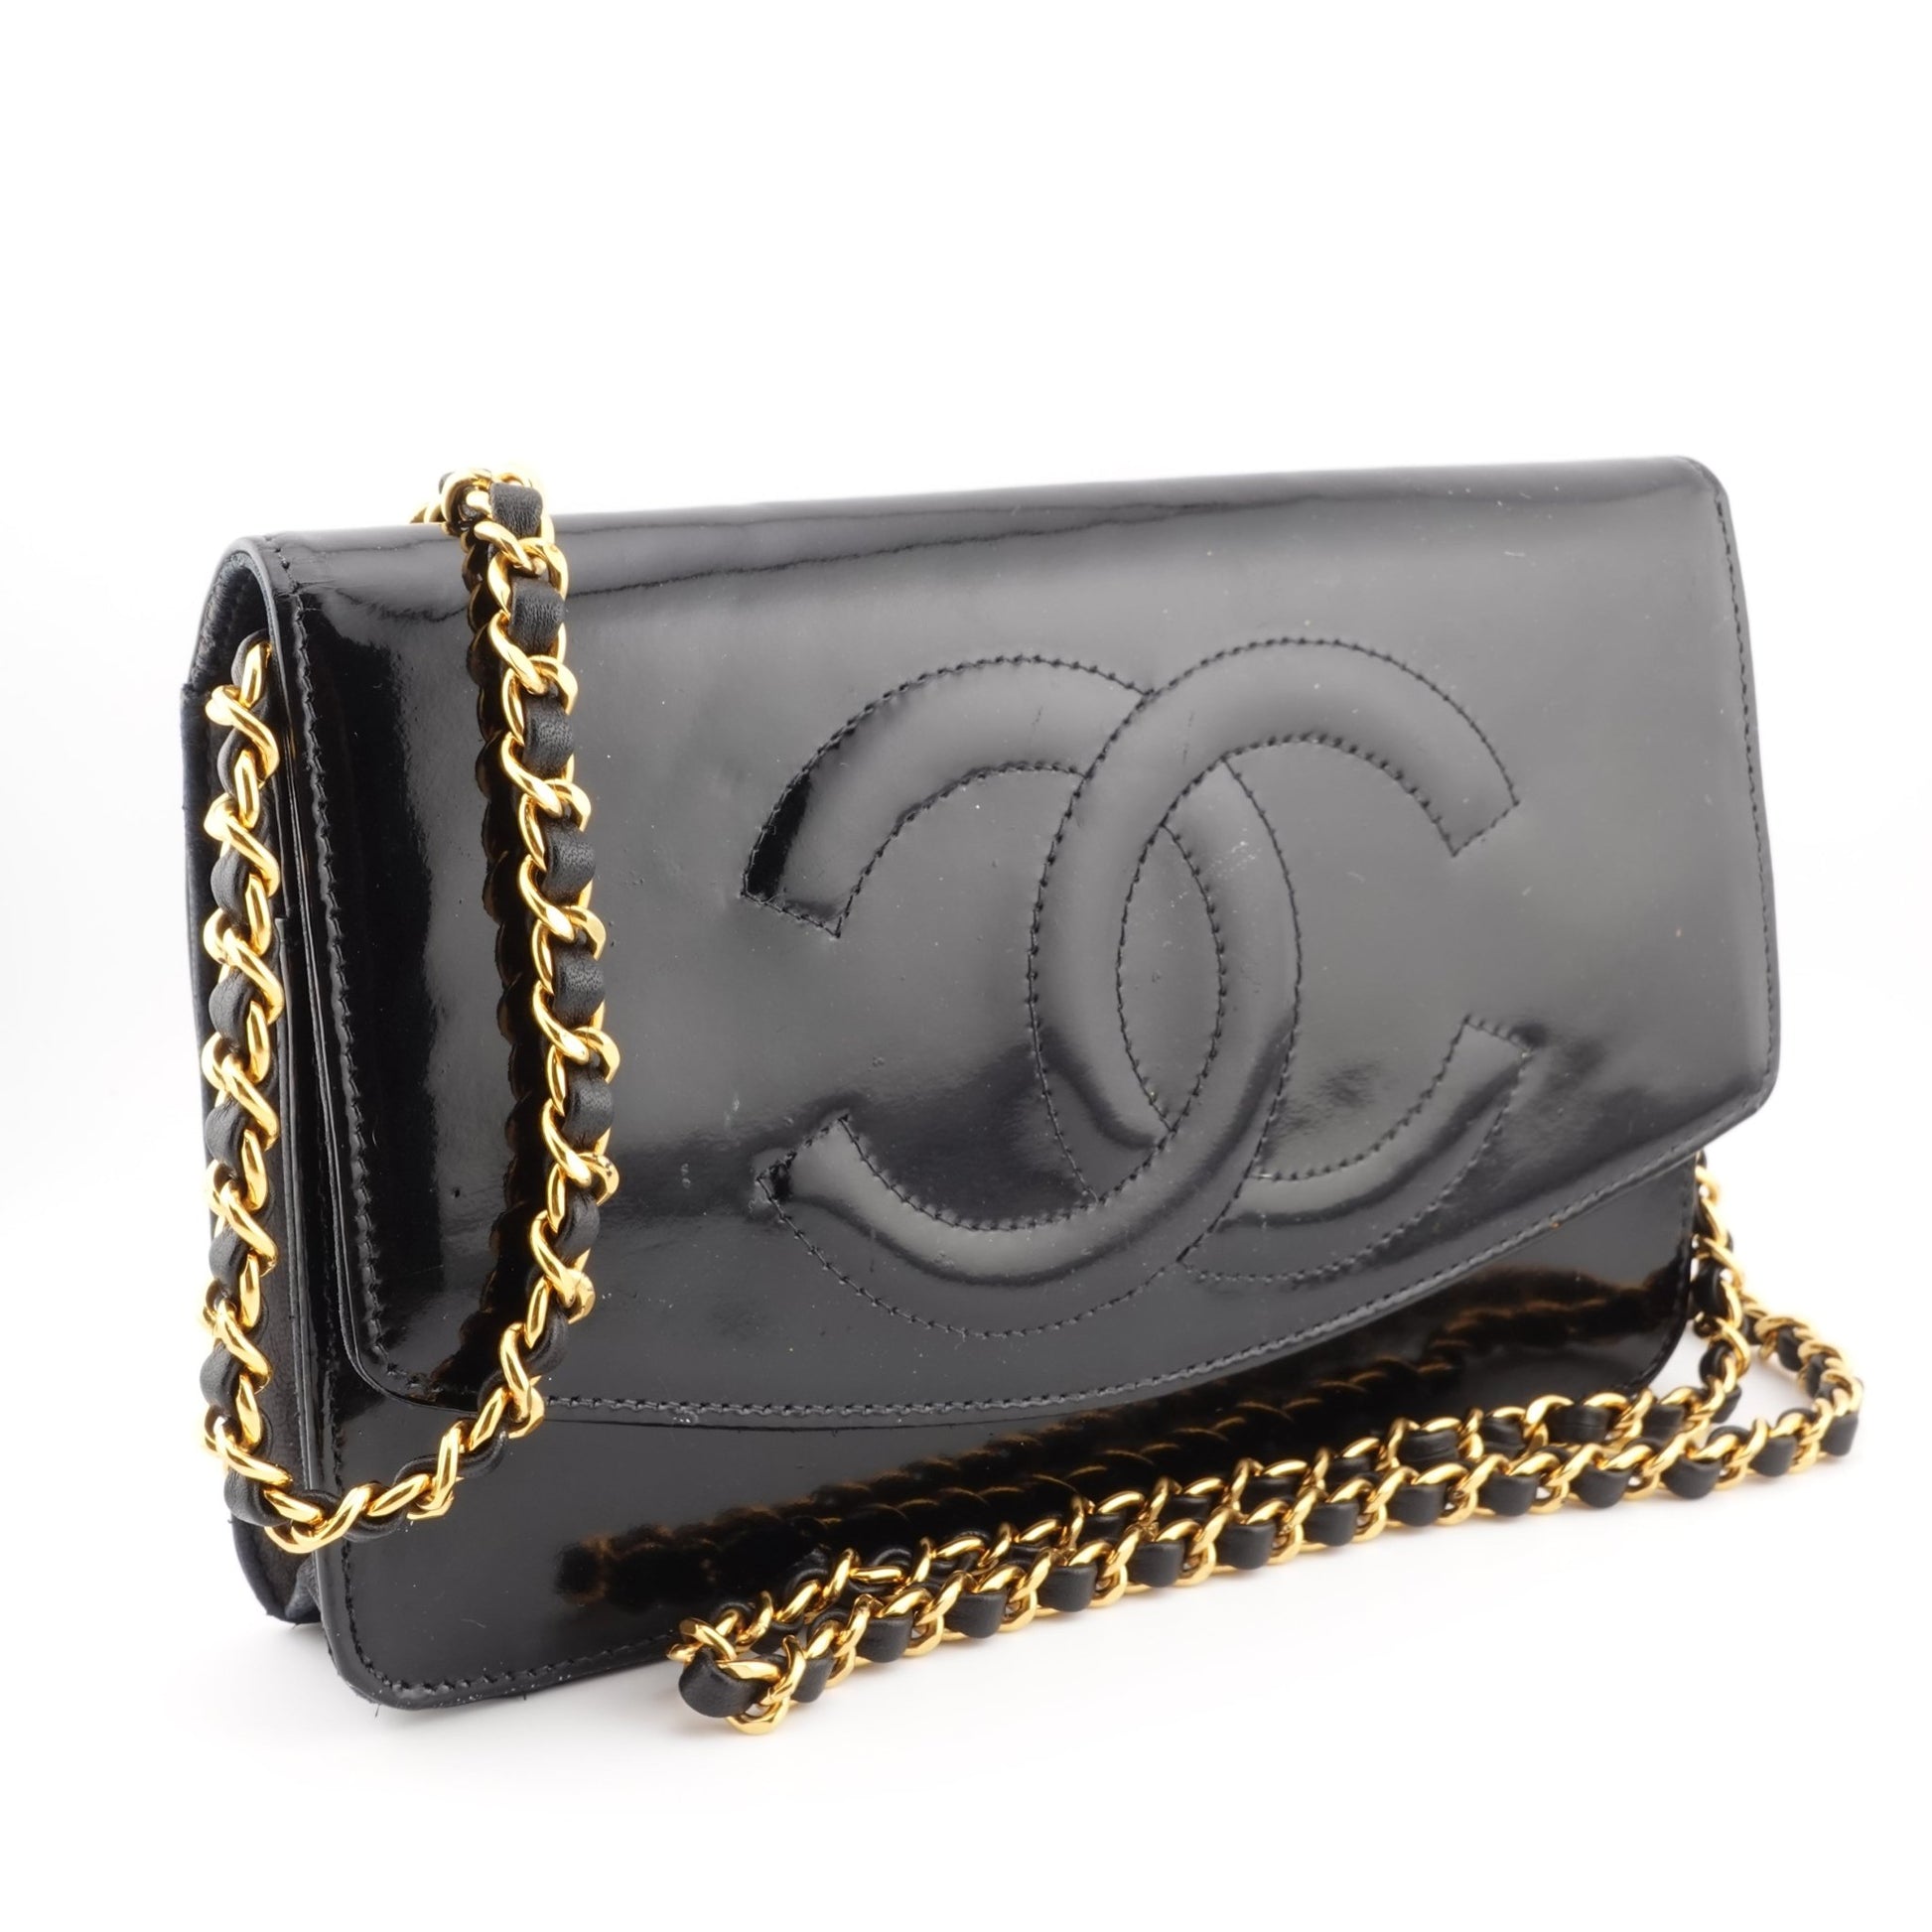 CHANEL Patent Leather Timeless Original Wallet on Chain - Bag Envy